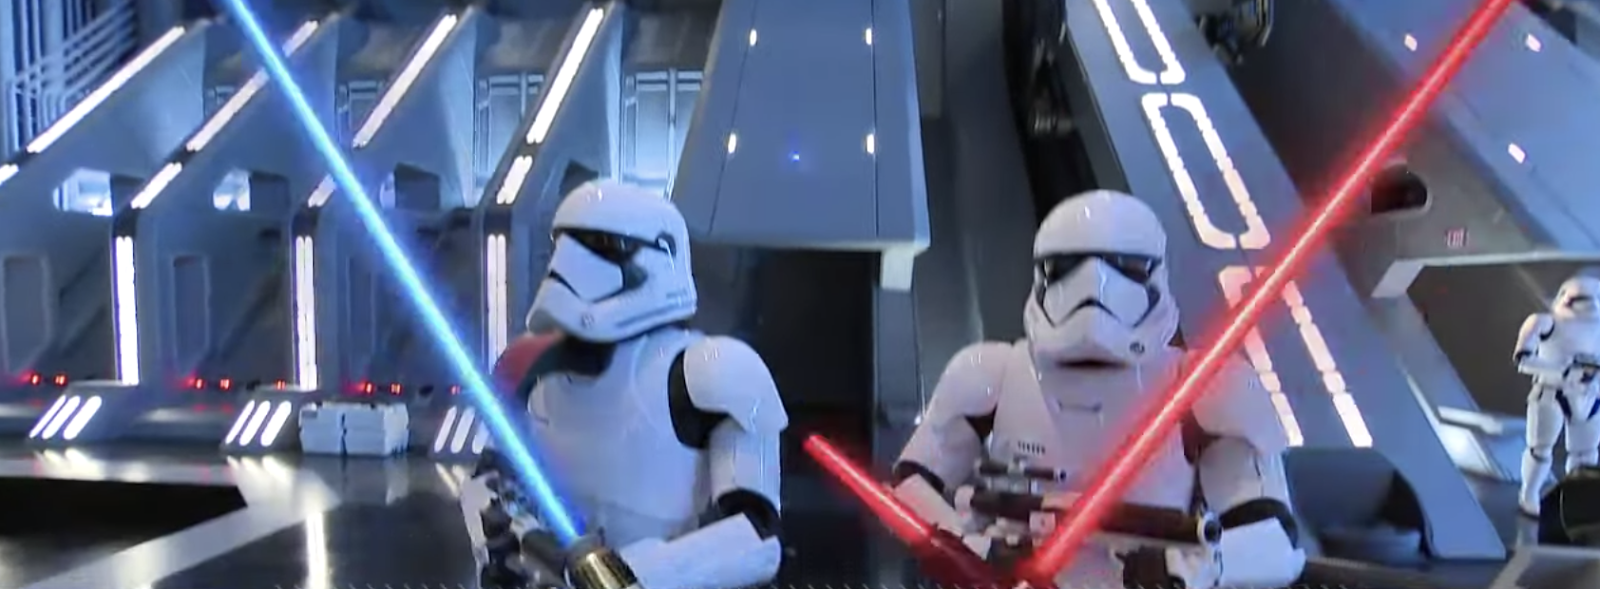 Note: The lightsabers were part of a scene cut animation and are NOT part of the attraction.